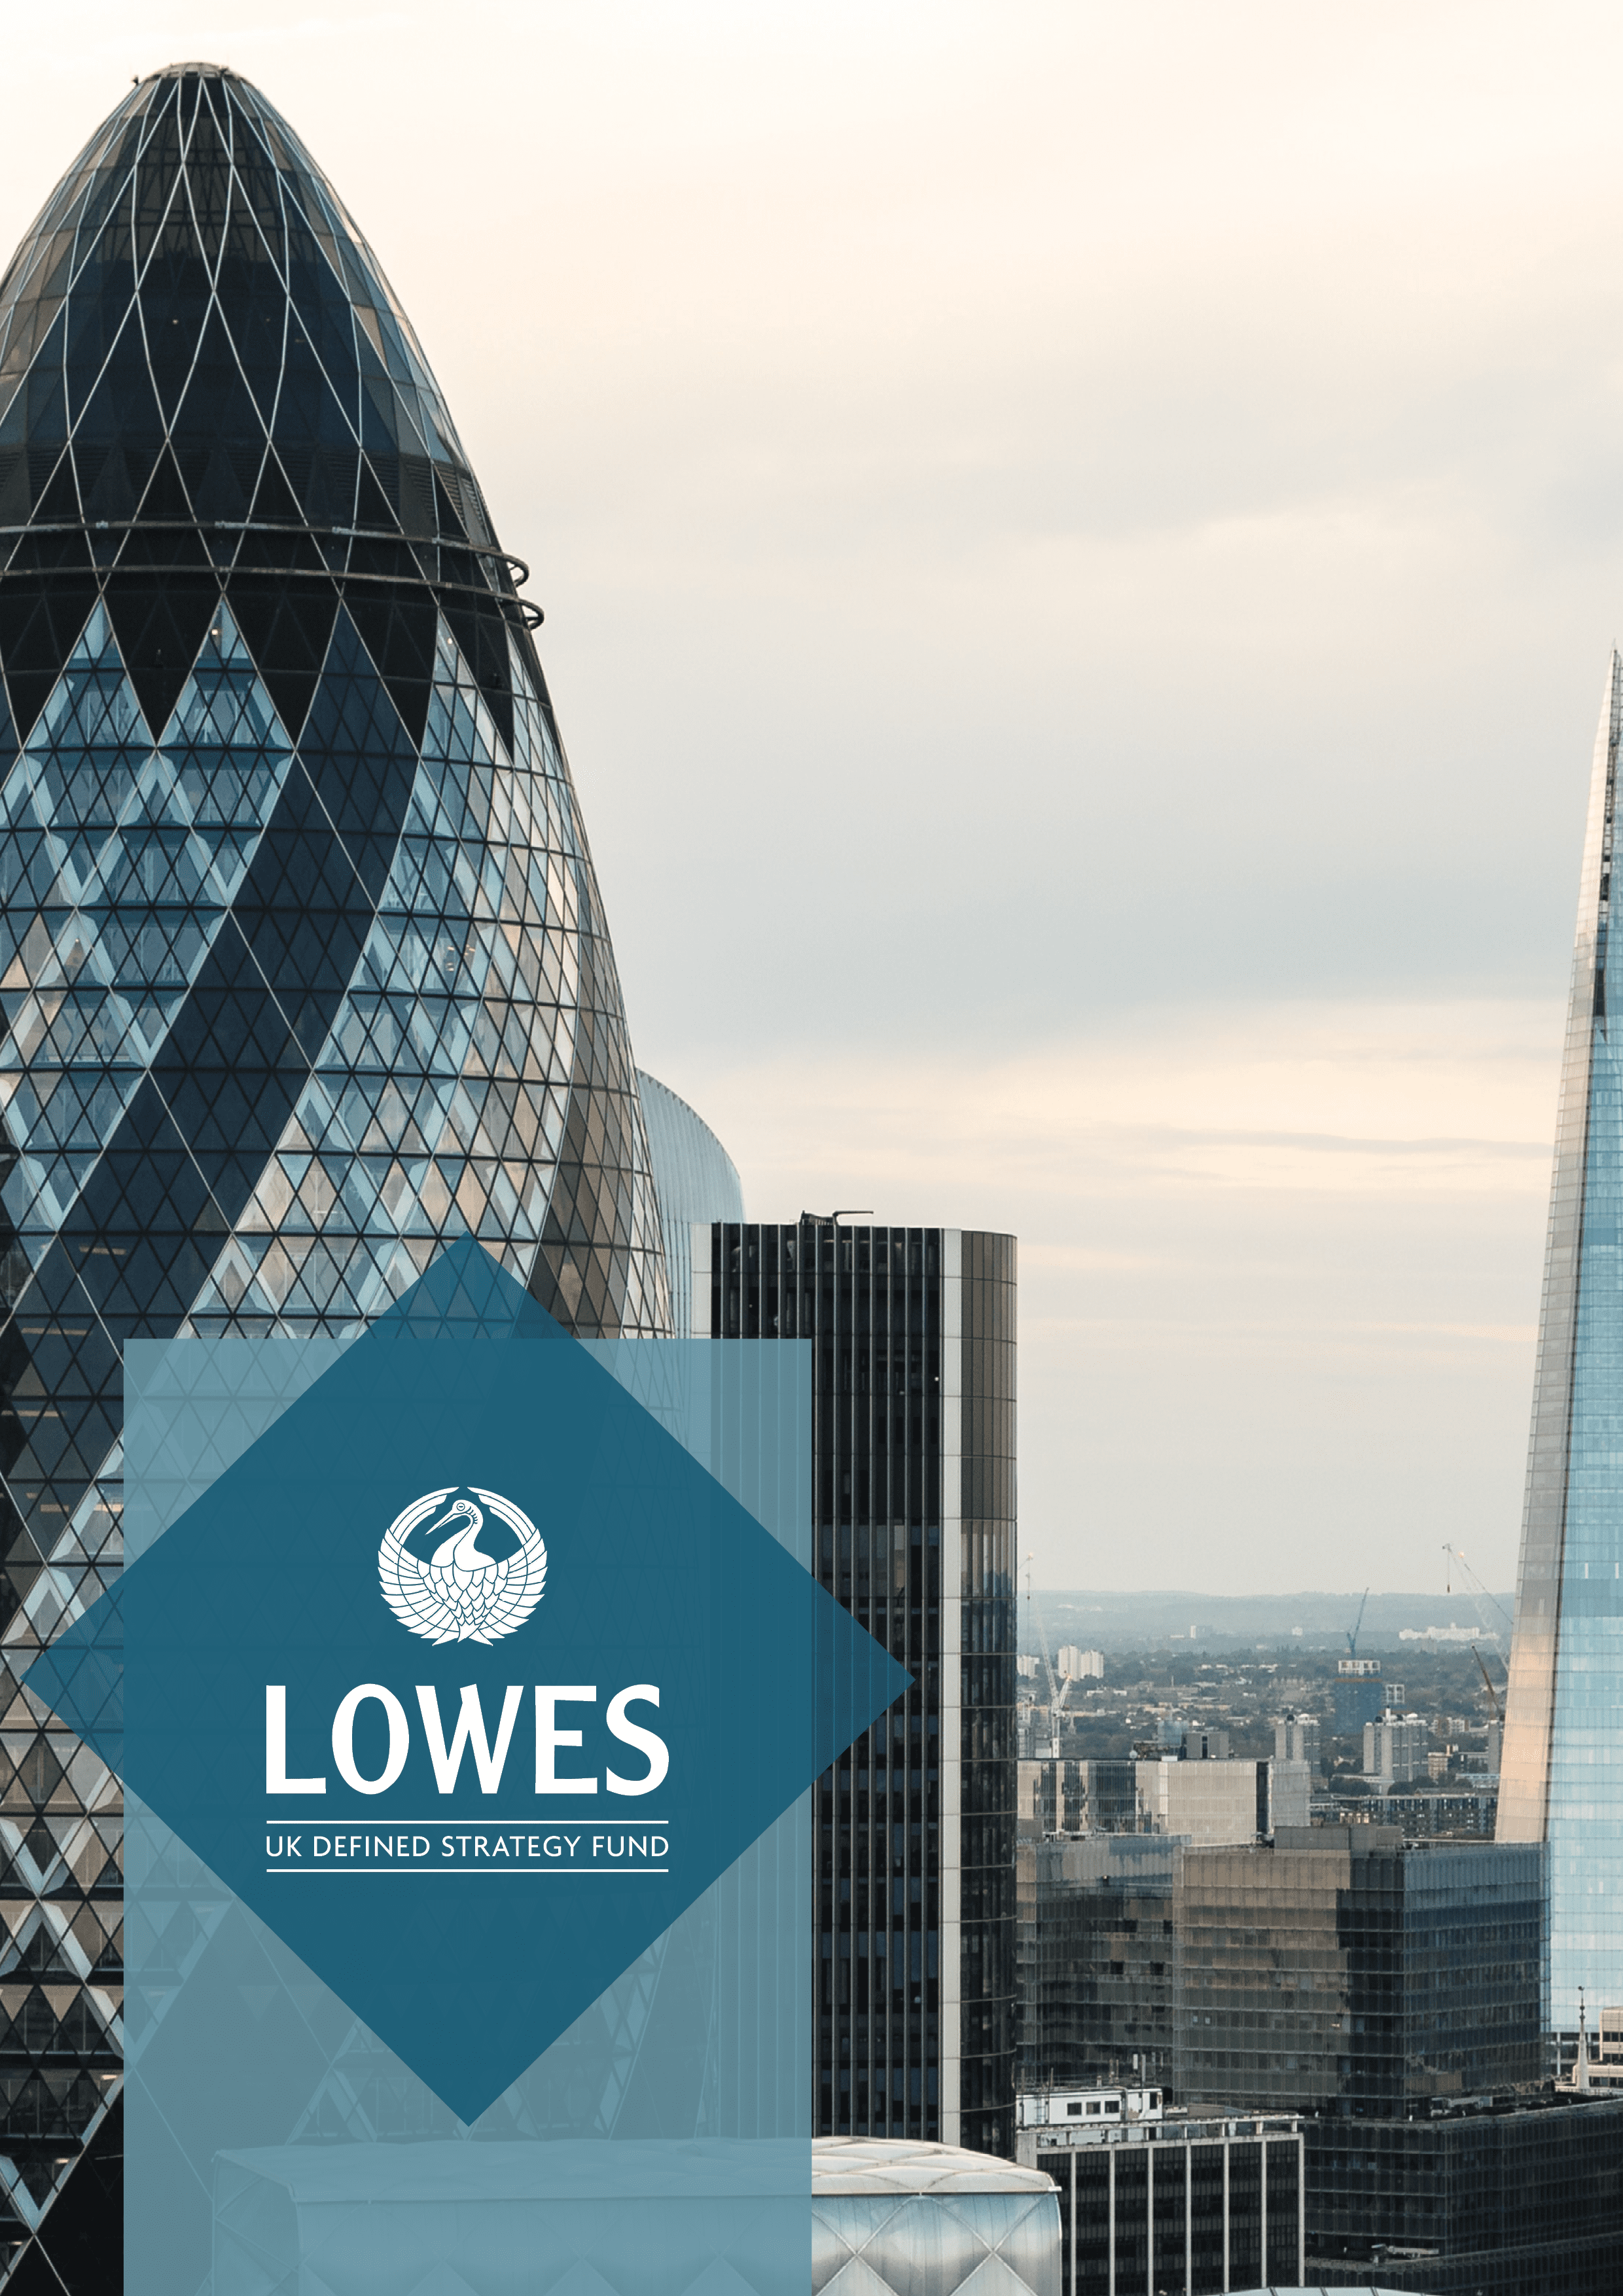 Lowes UK Defined Strategy Fund